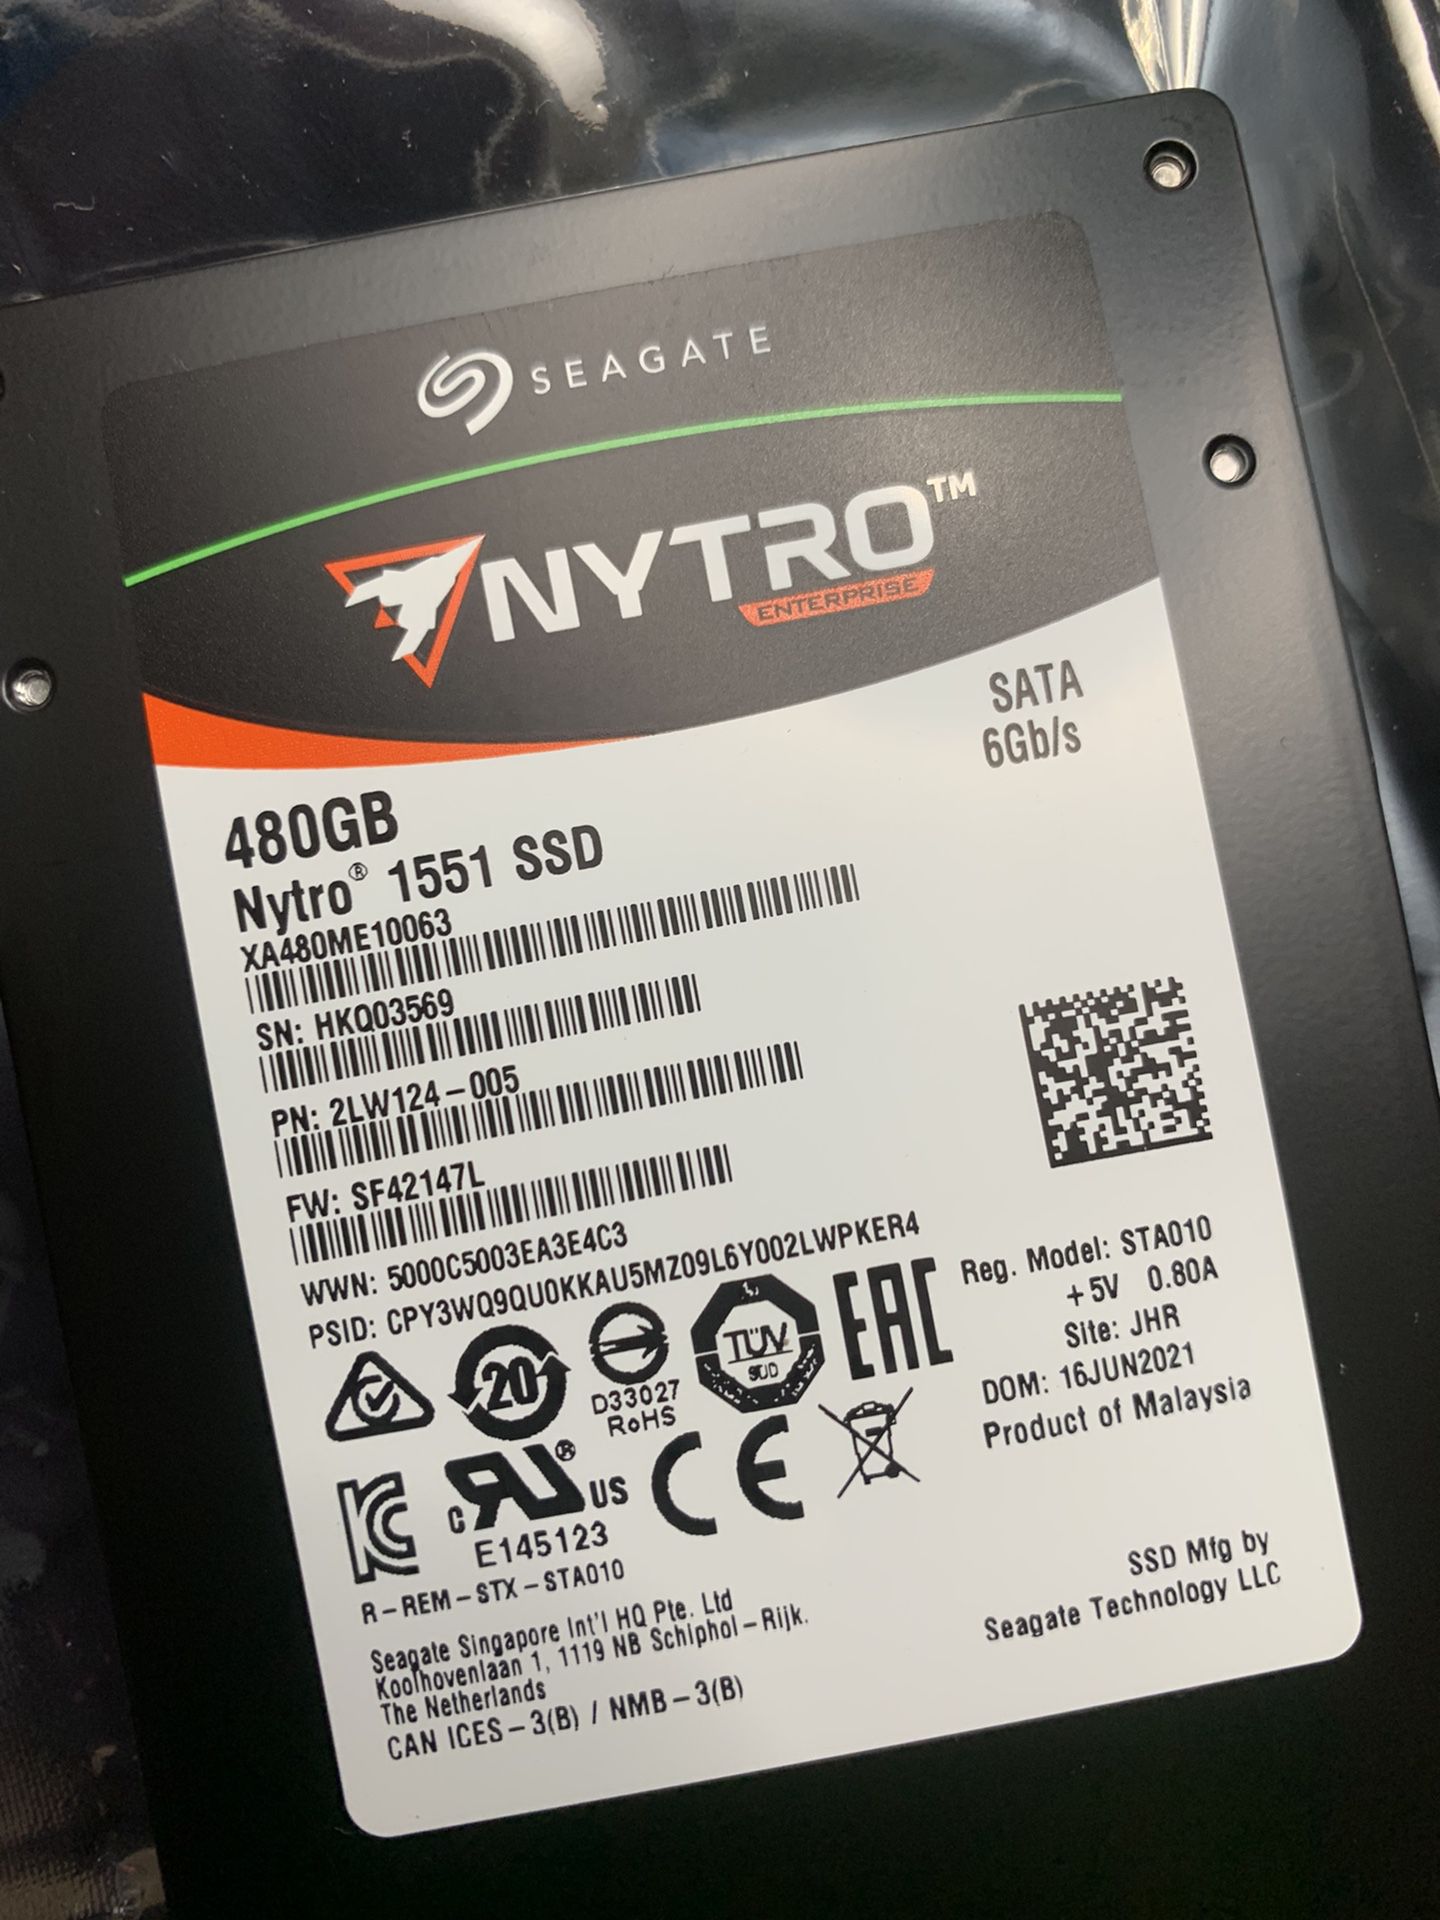 Seagate  Nytro 1551 SSD. 480gb, 6gbps